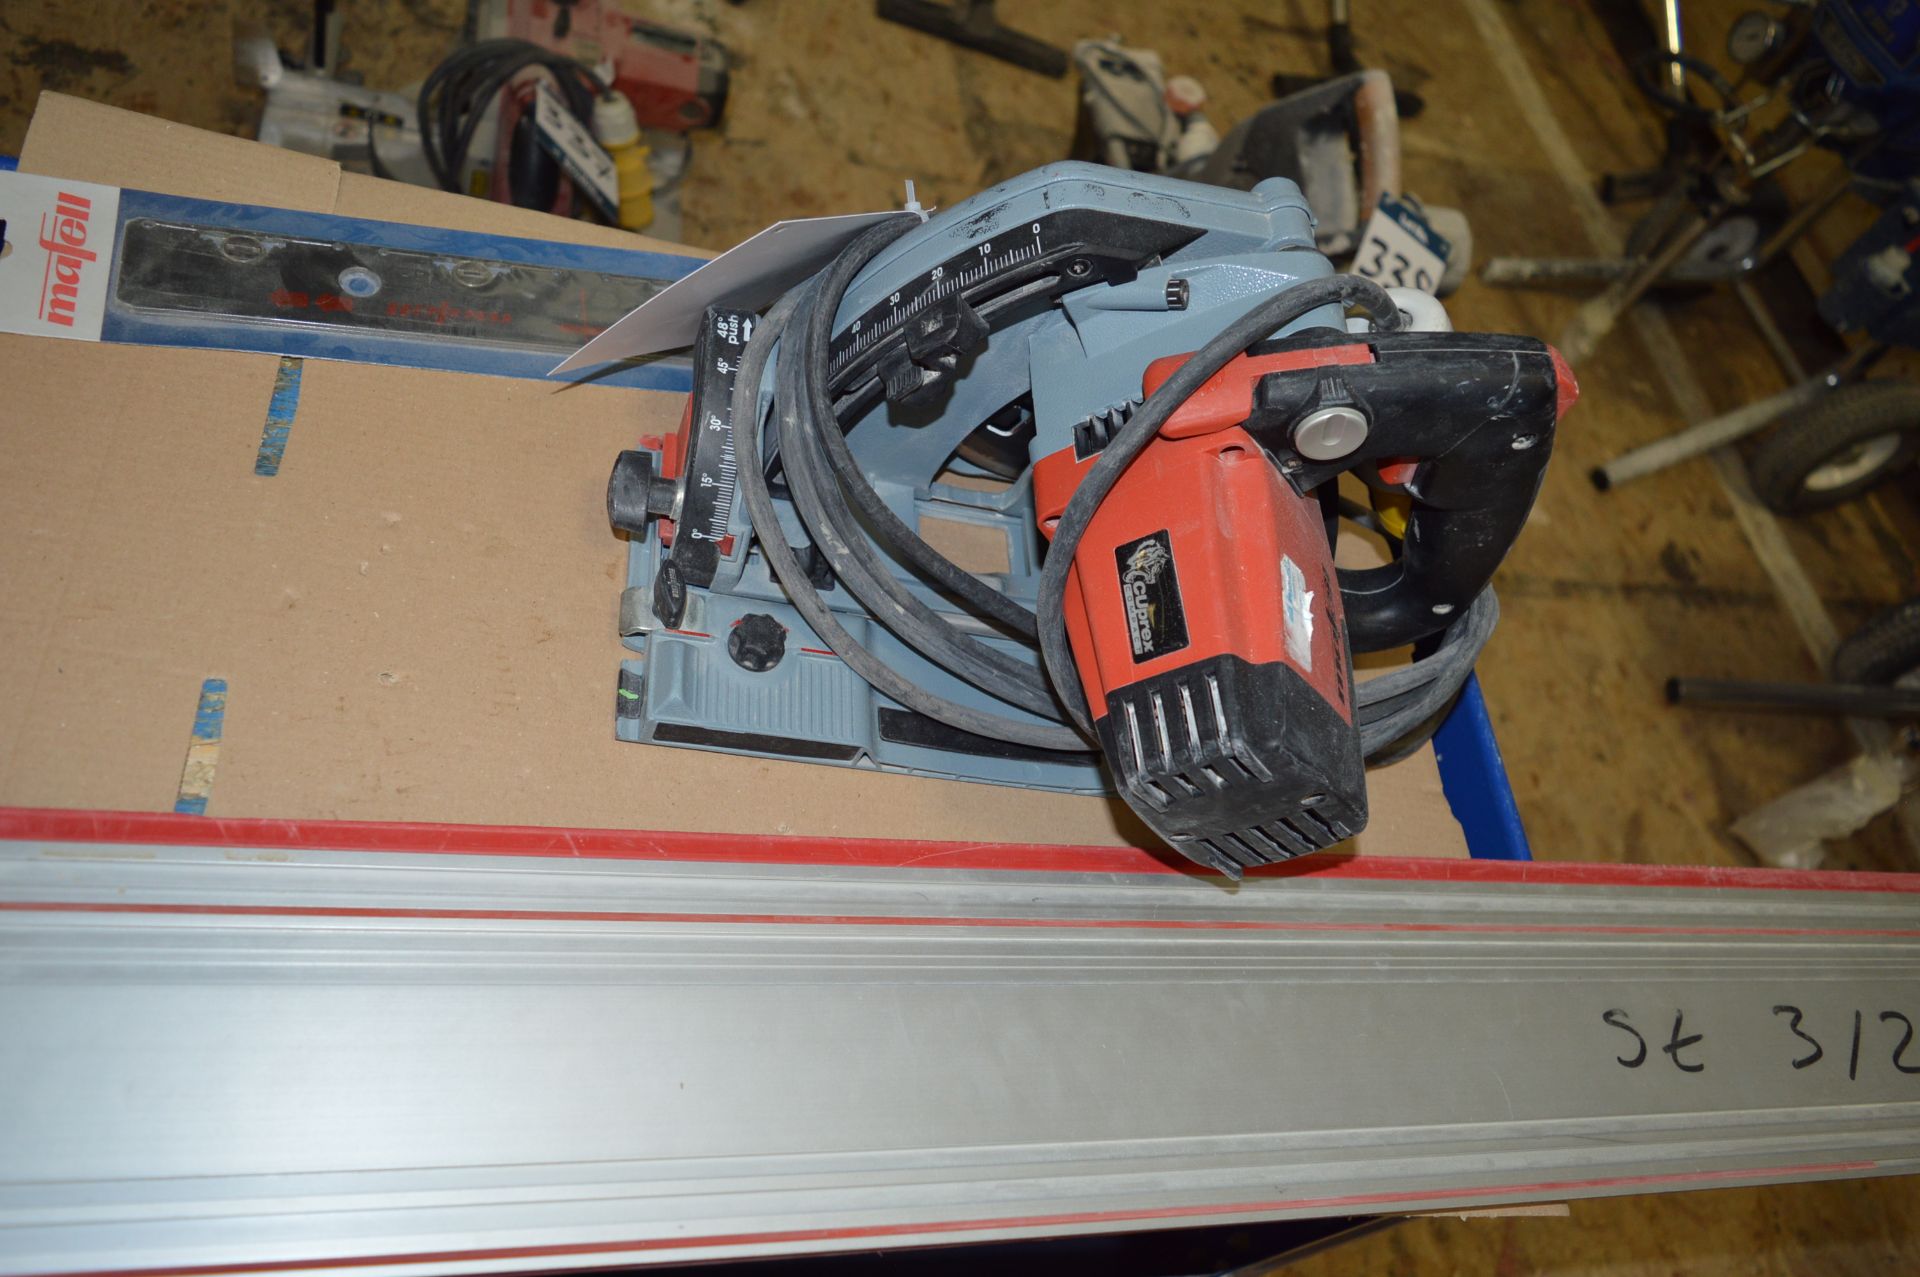 Mafell, cross cutting system with saw, Model Cuprex Compact MT55CC, 110v and 2x (no.) F160 guide - Image 2 of 2